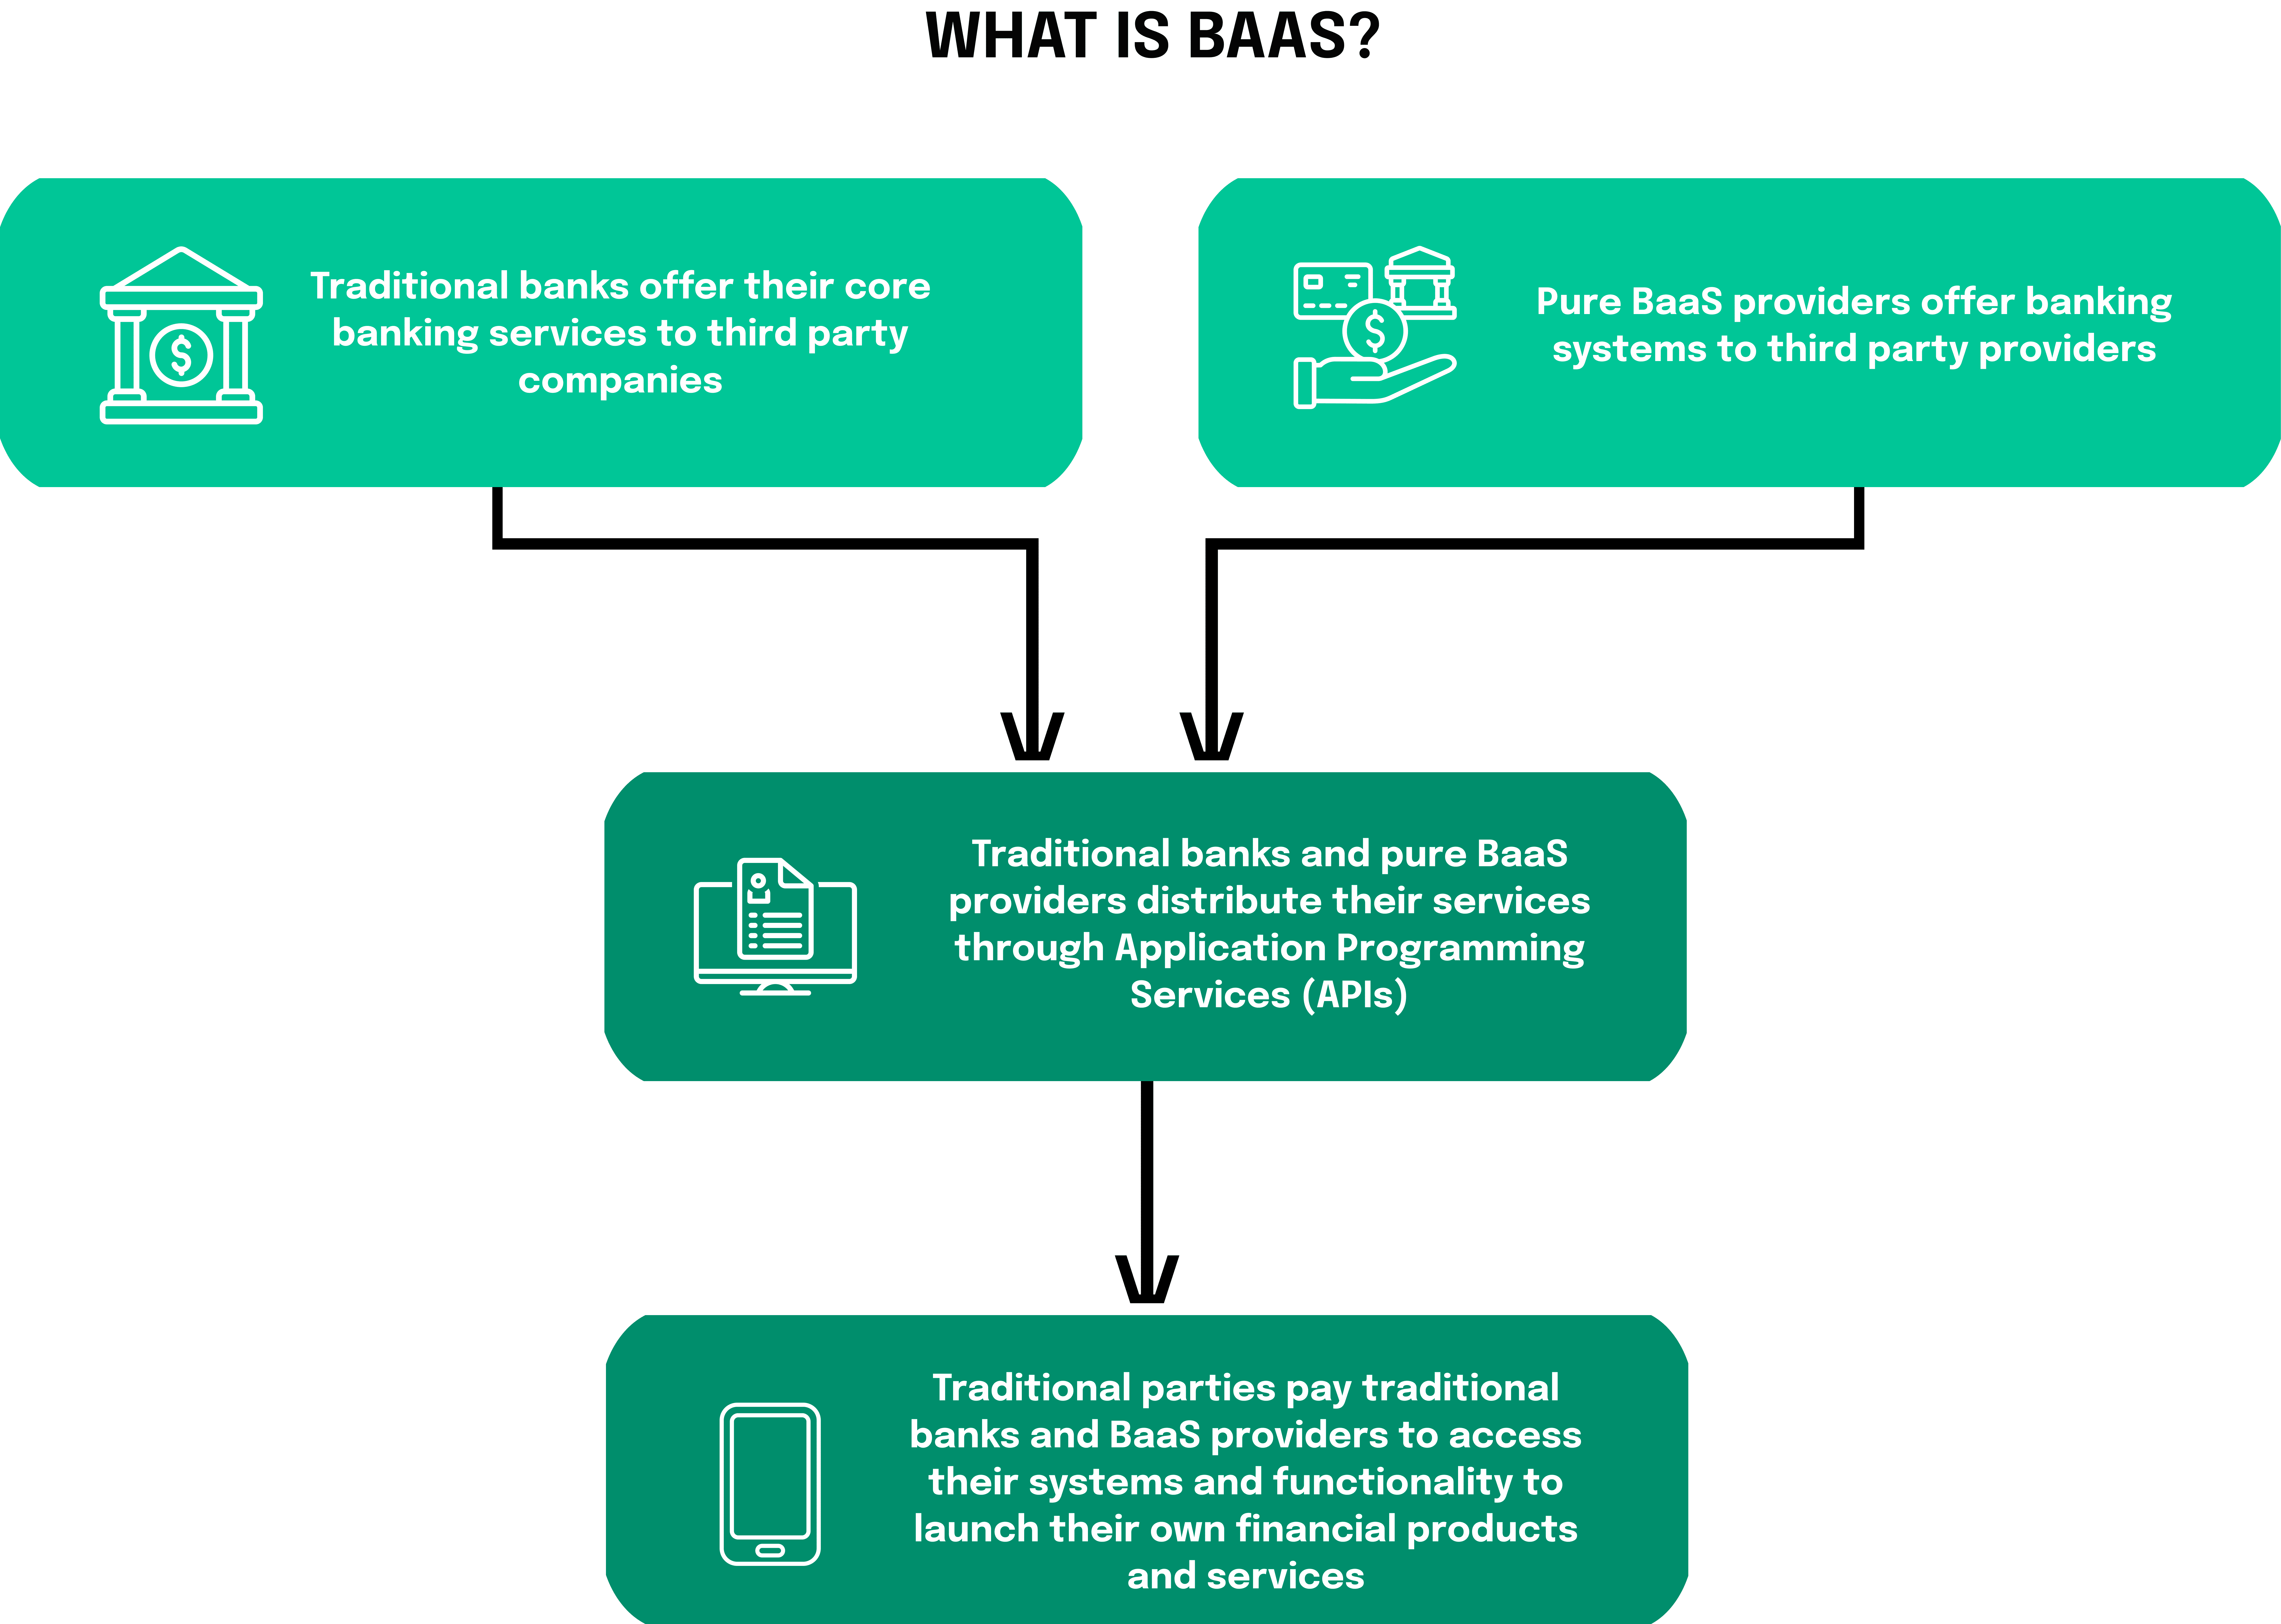 BaaS is an end-to-end model that enables digital banks and other third-party providers to connect with traditional banks' systems via APIs